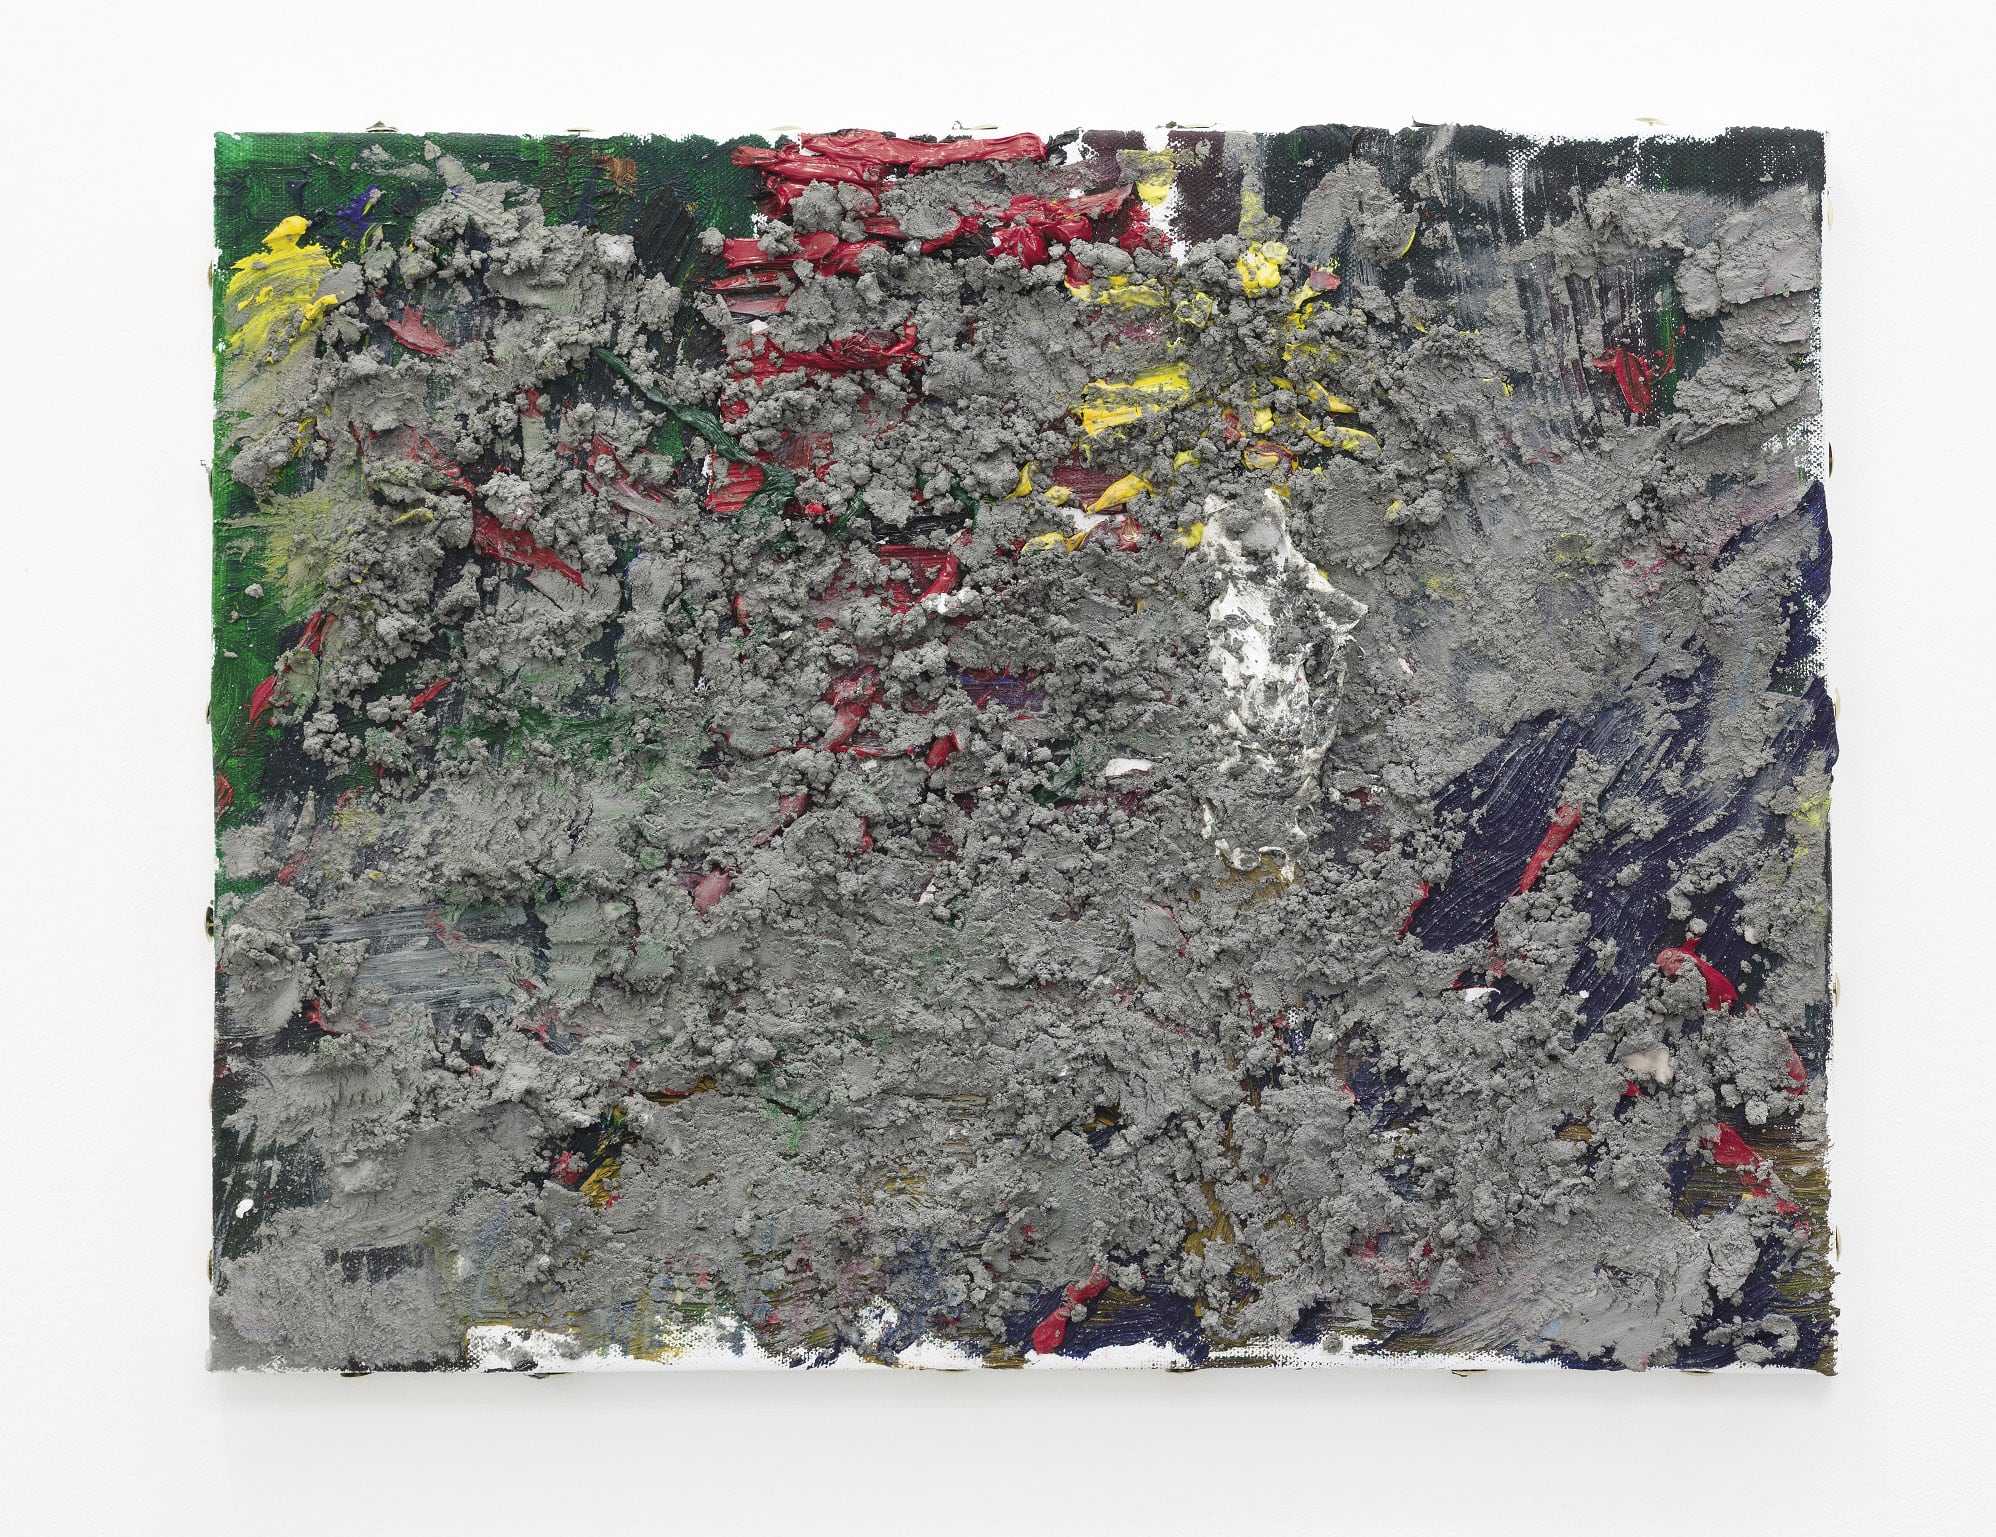 Dan Arps, Study for Still Life 2013, oil, grout and PVA on canvas